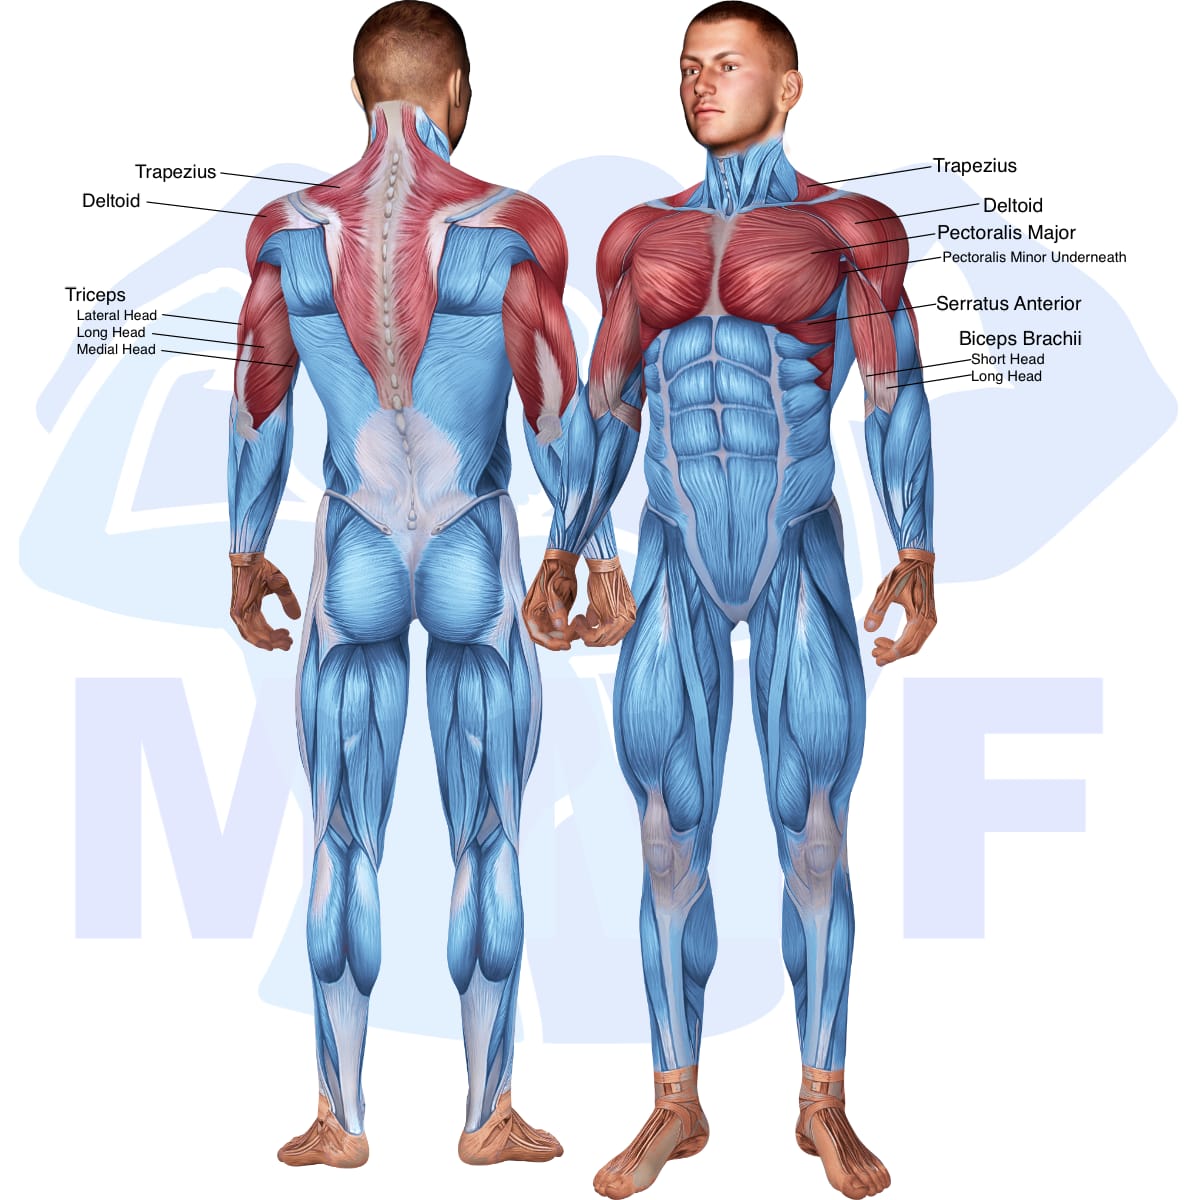 Image of the skeletal muscular system with the muscles used in the dumbbell cuban press exercise highlighted in red and the rest in blue.